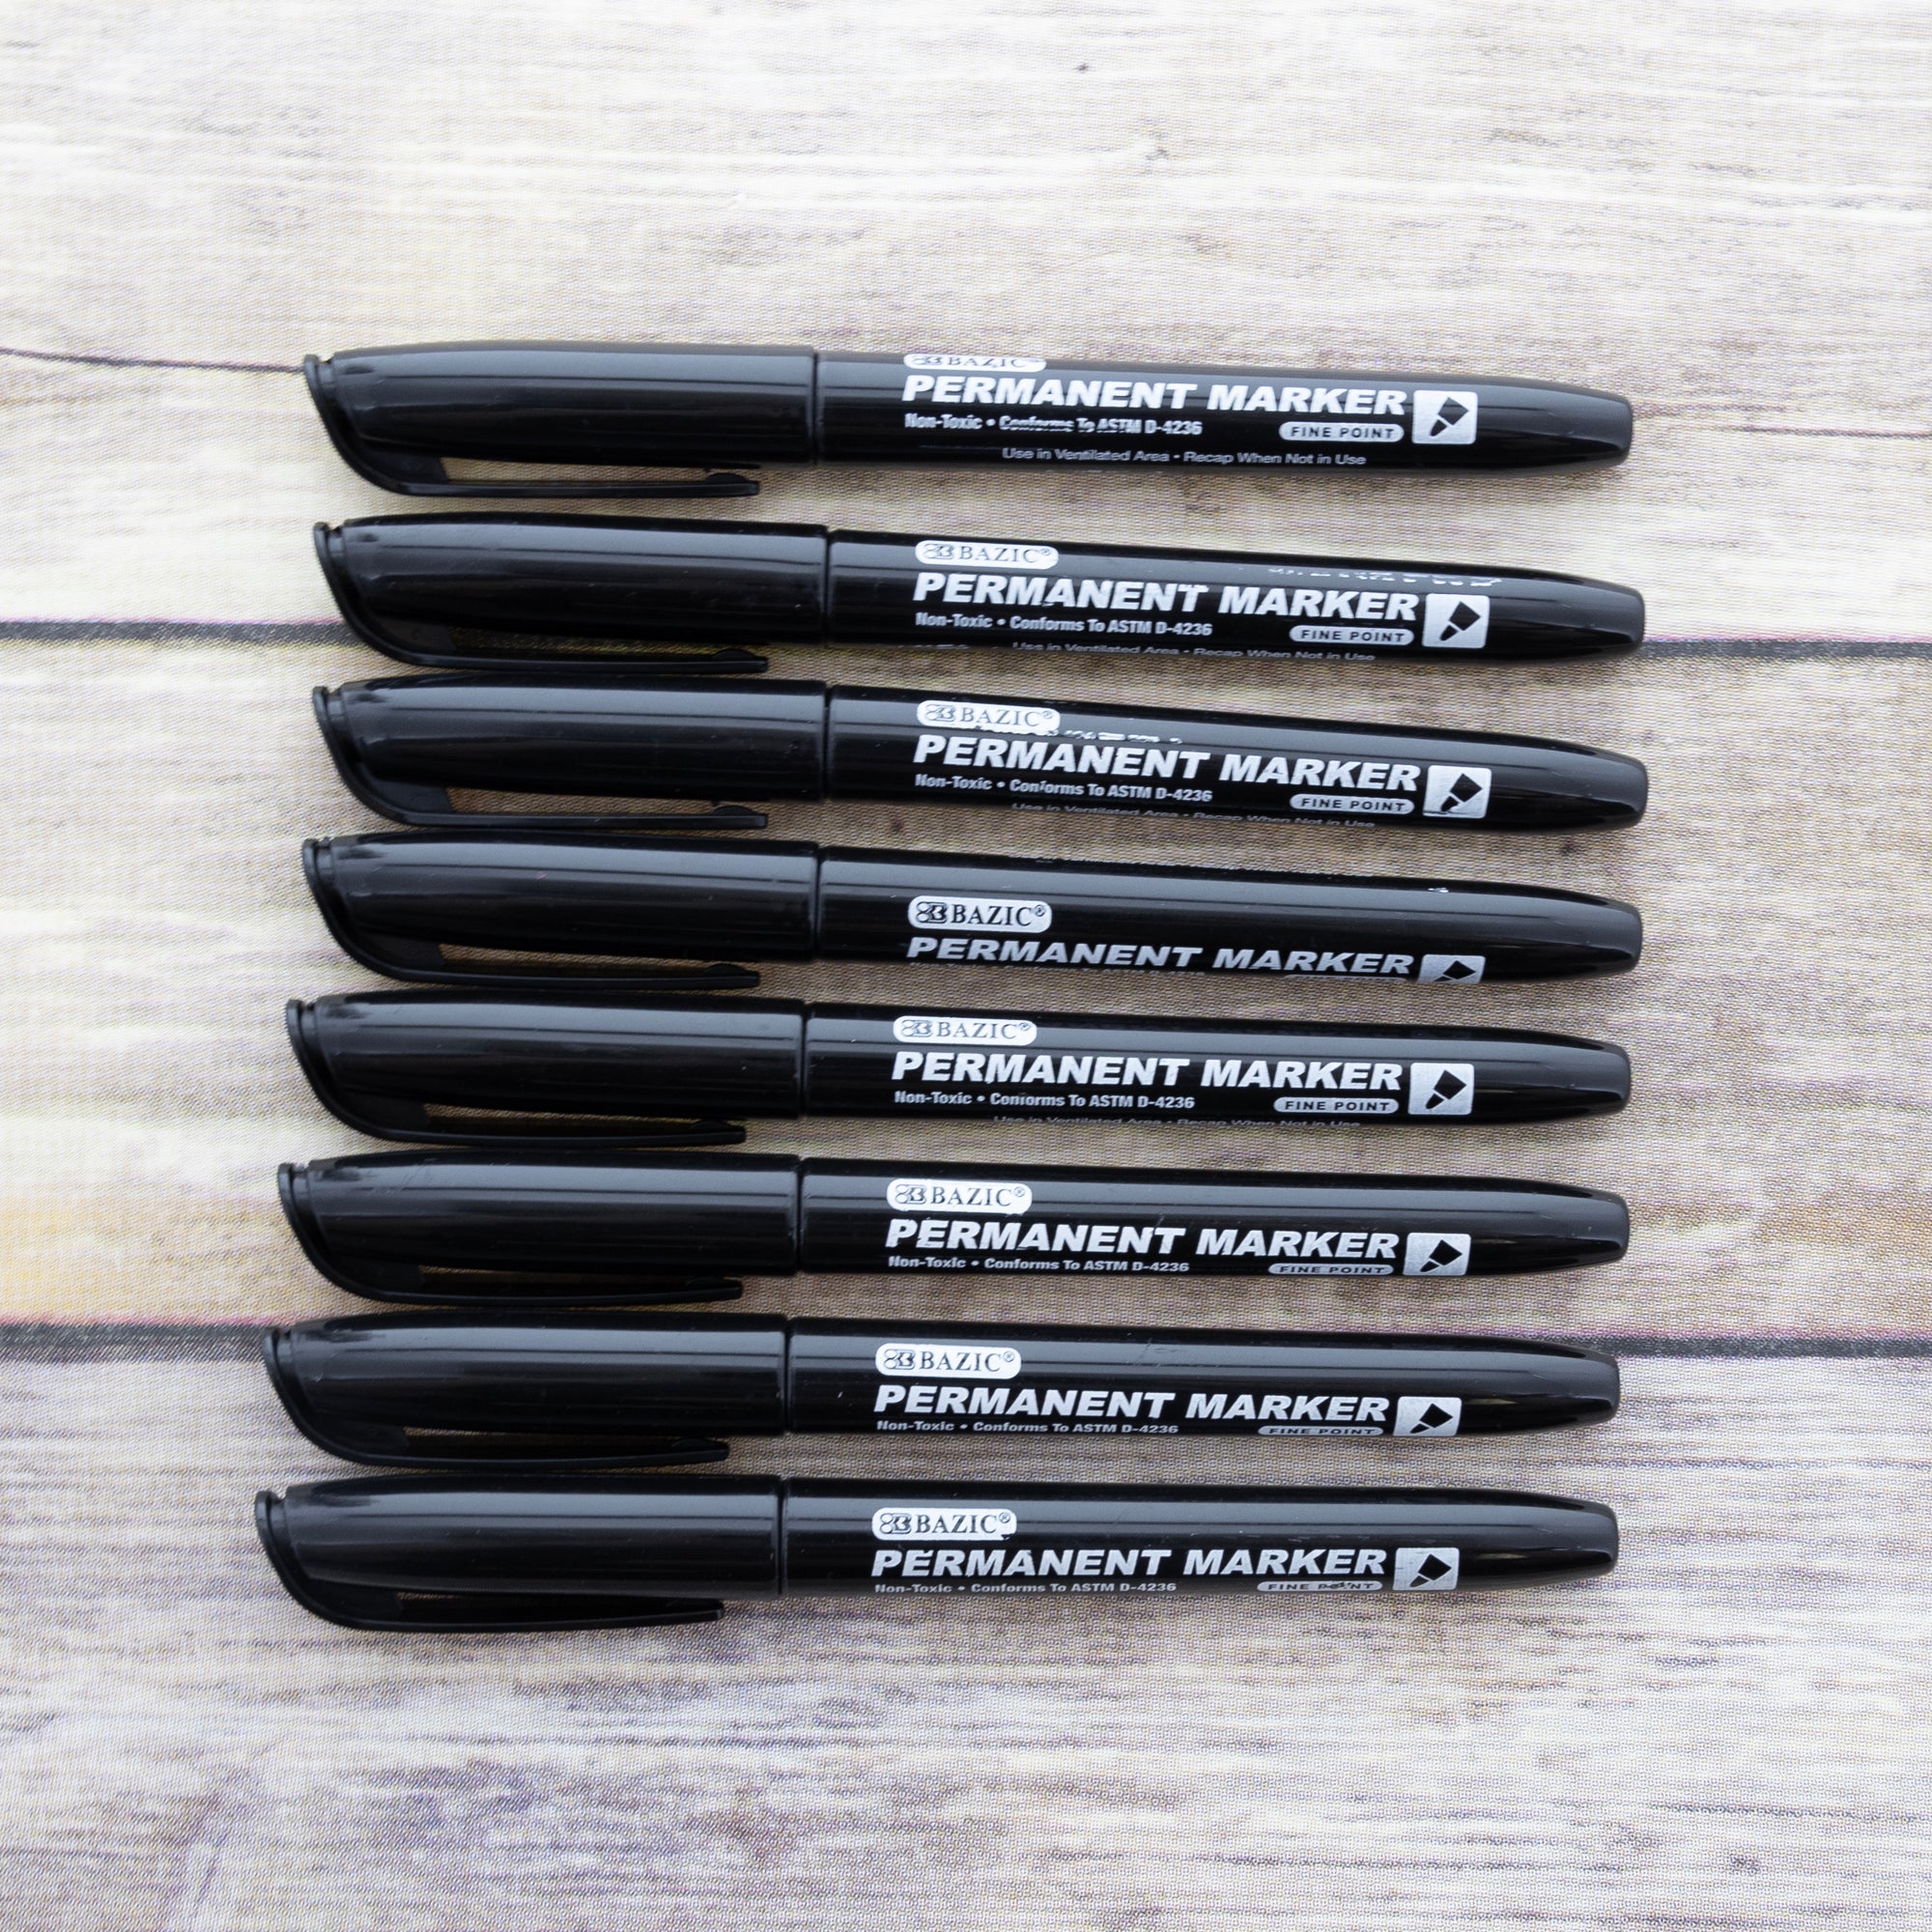 Super Black Permanent Fineliners Ultimate Line Drawing Set of 8 - Creative Mark